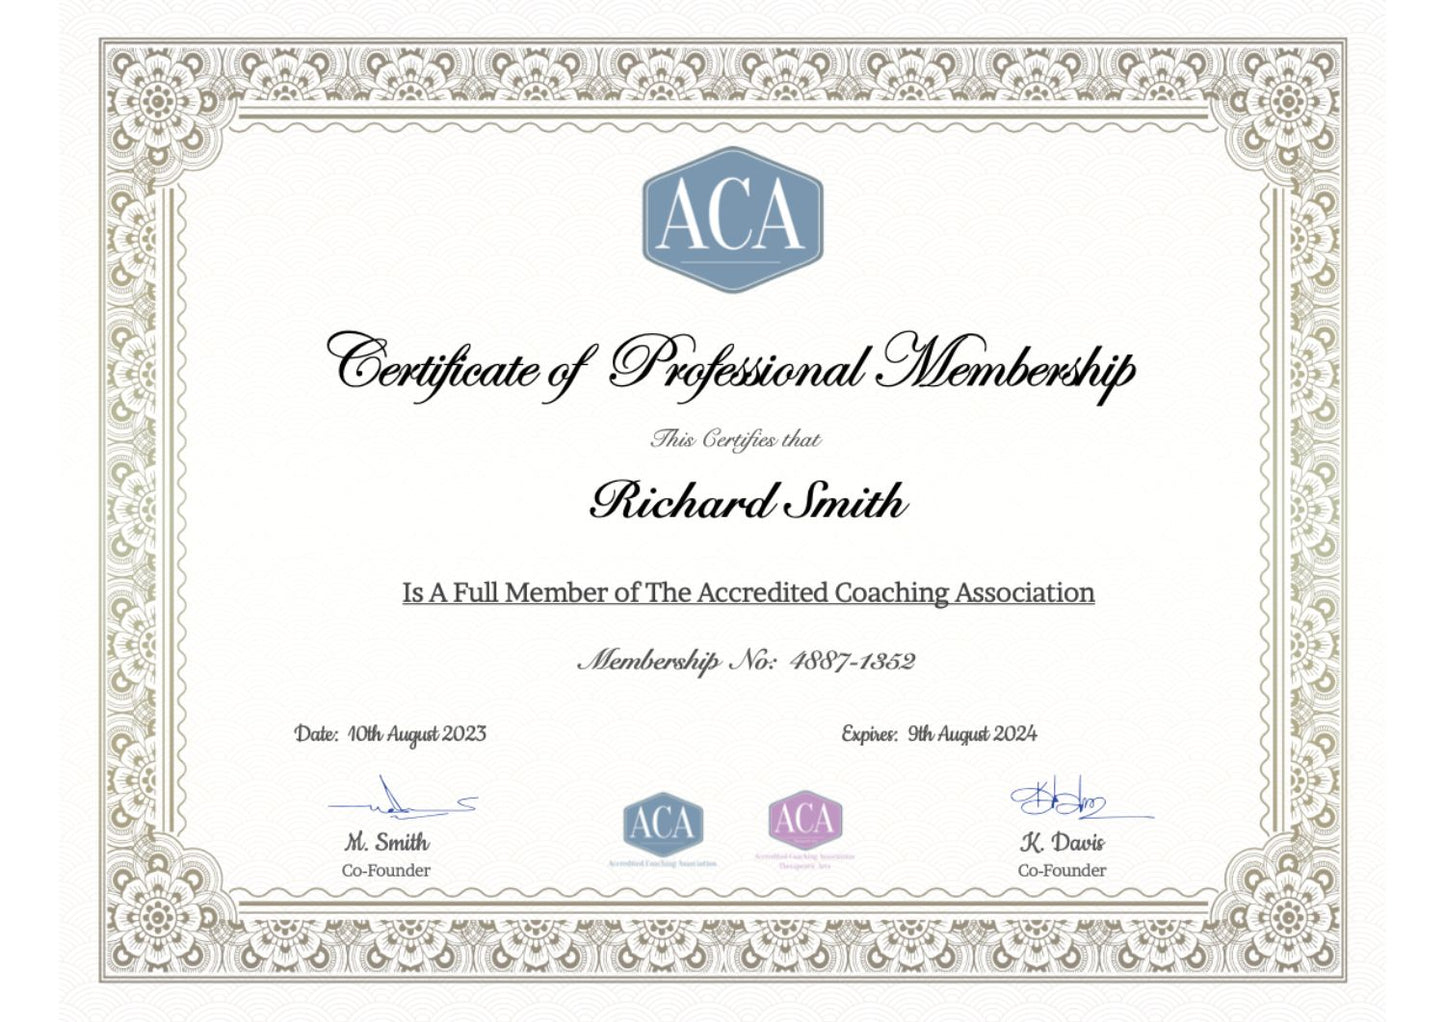 A copy of the (ACA) Accredited Coaching Association Membership Certification, the ACA logo and the ACA Therapeutic Arts logo